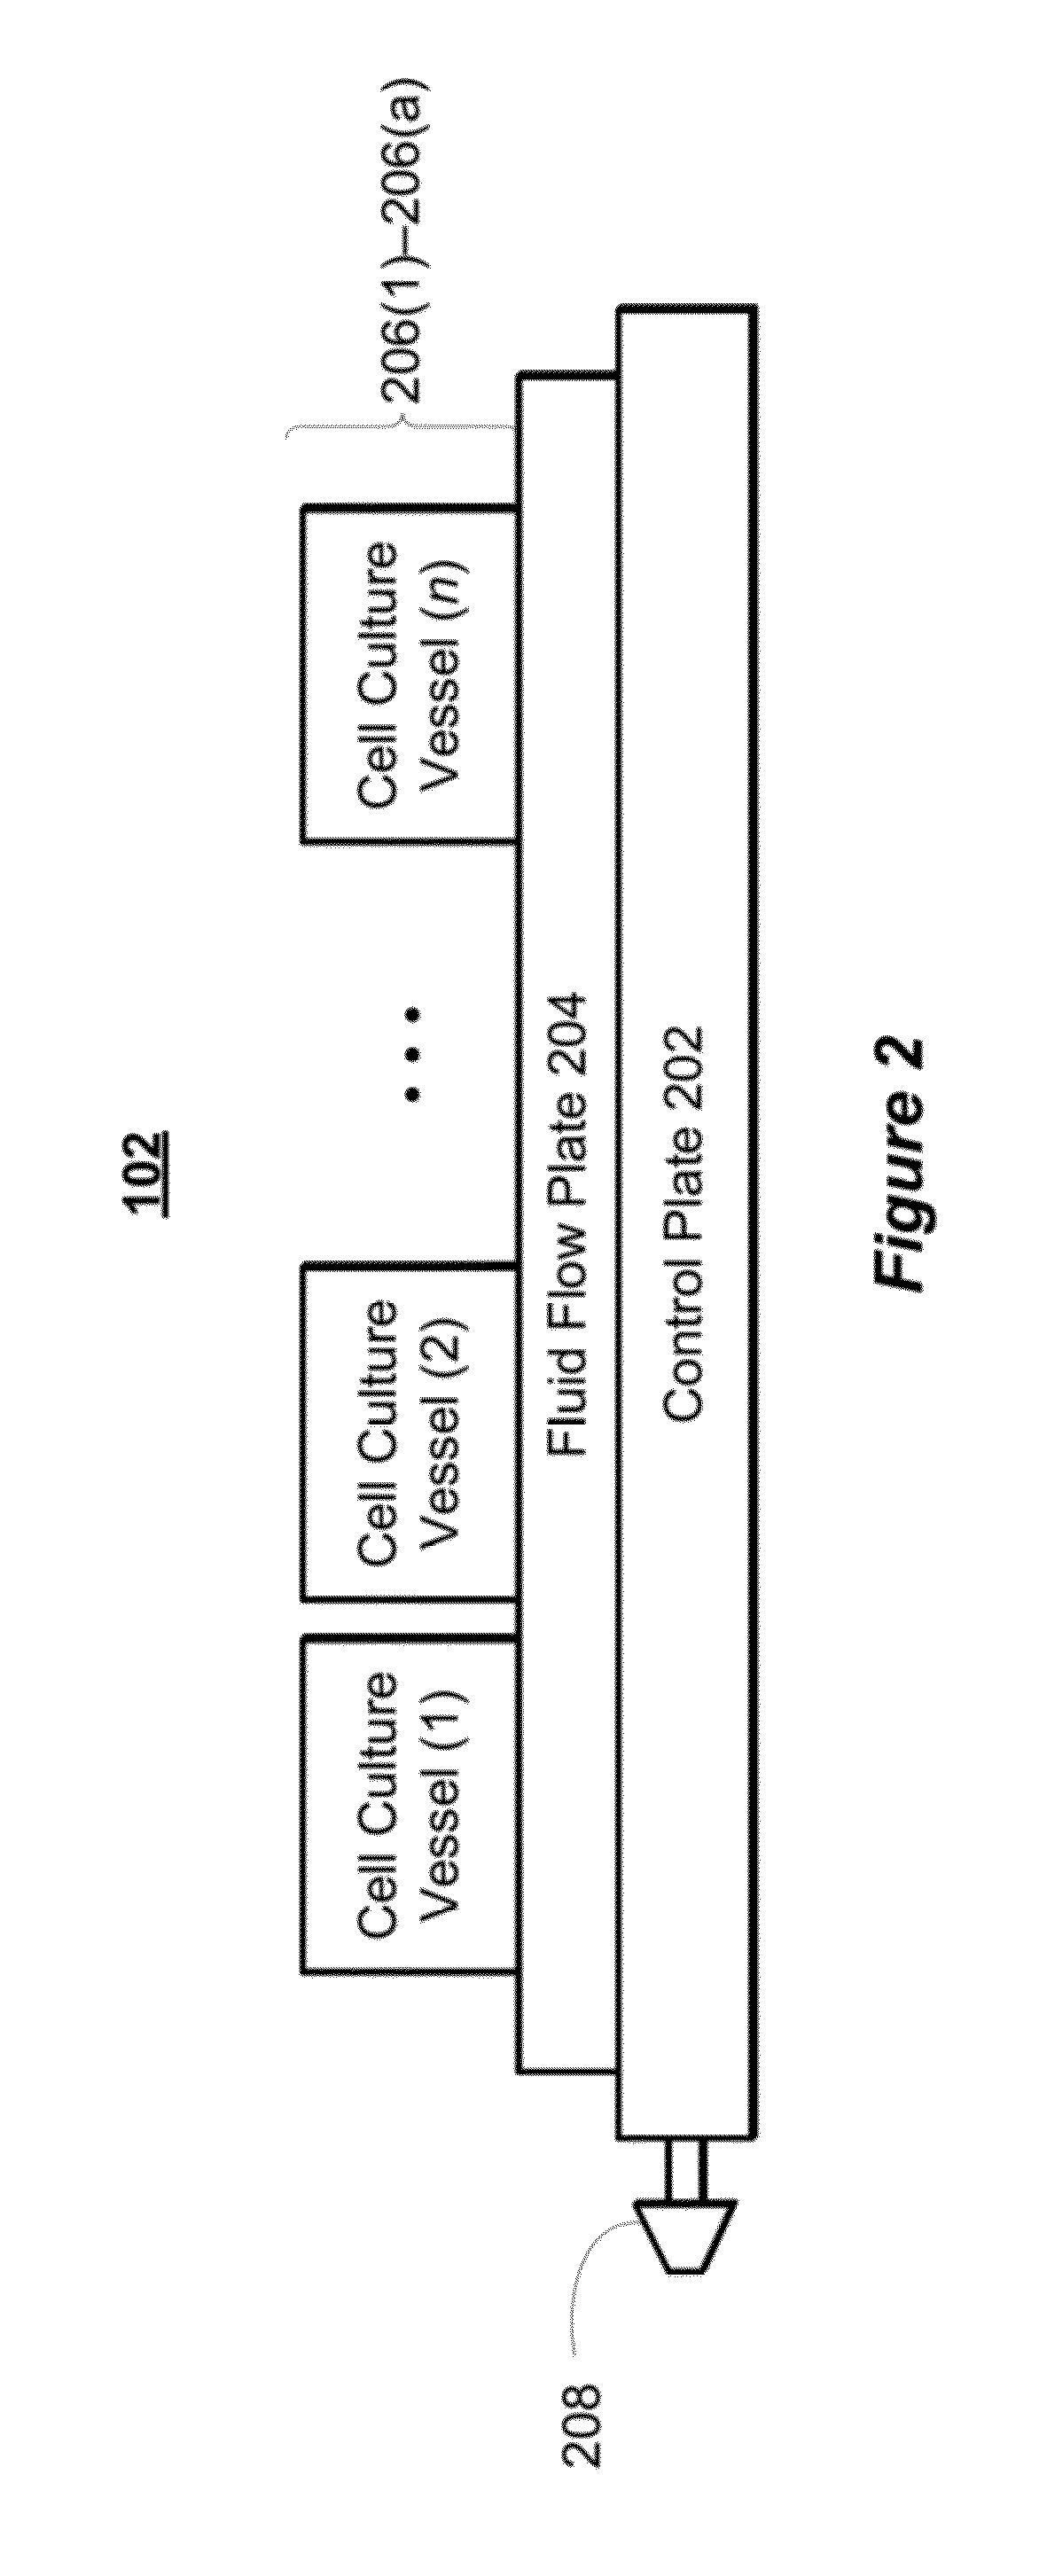 Modular platform for multi-tissue integrated cell culture